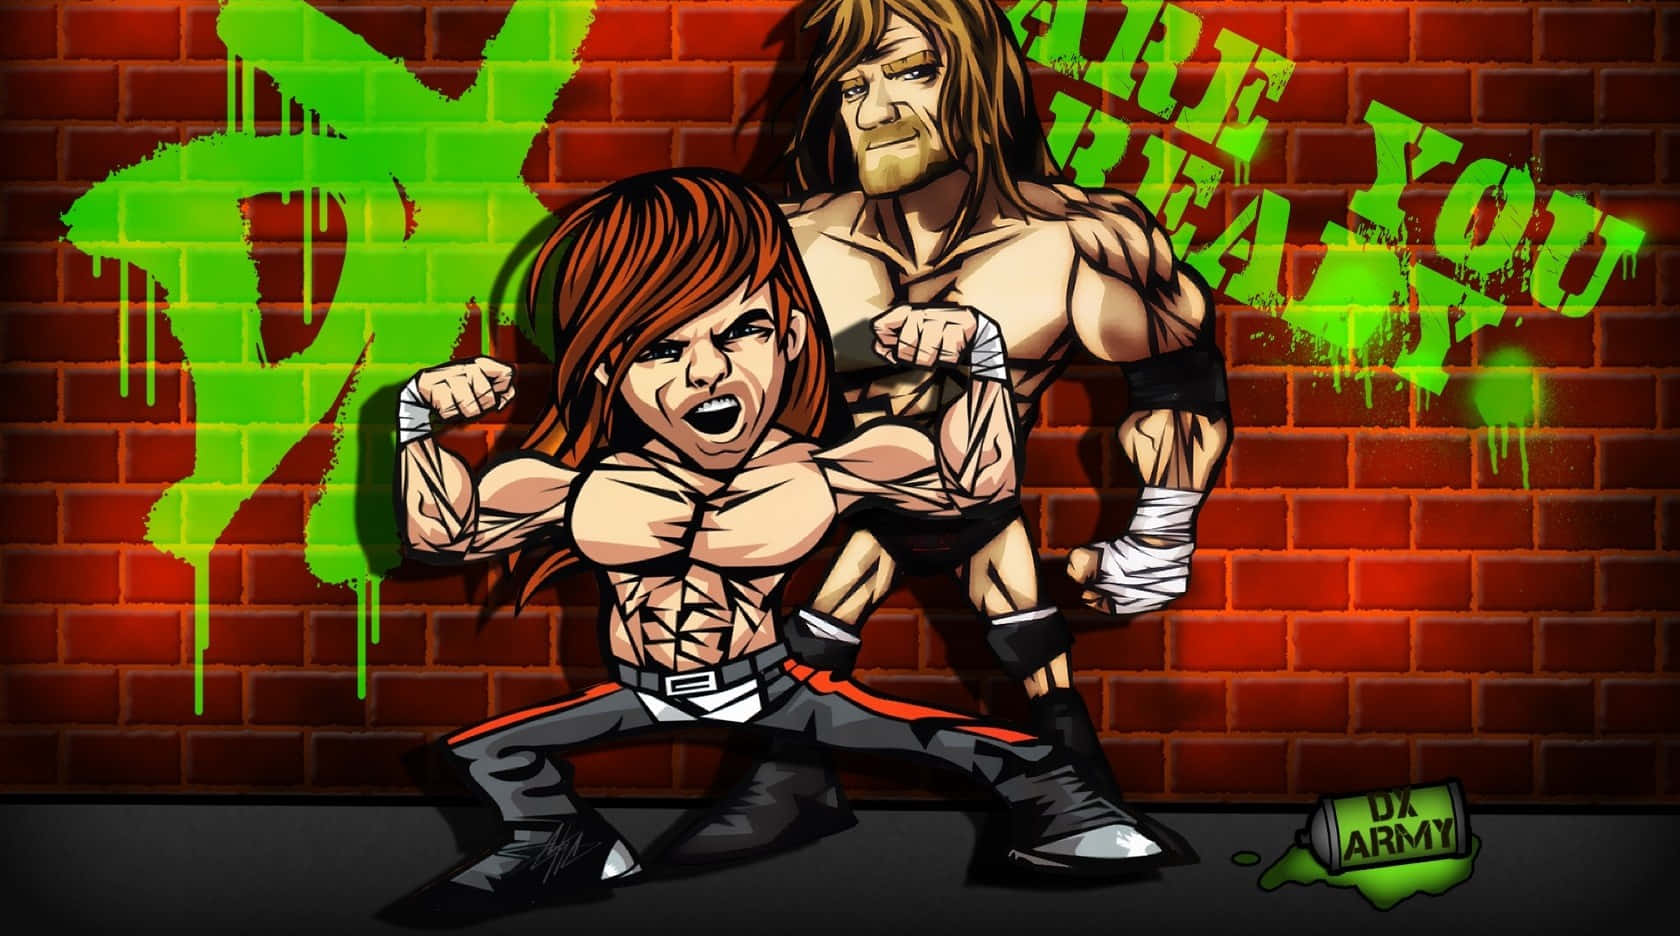 Triple H And Shawn Michaels Fanart Background